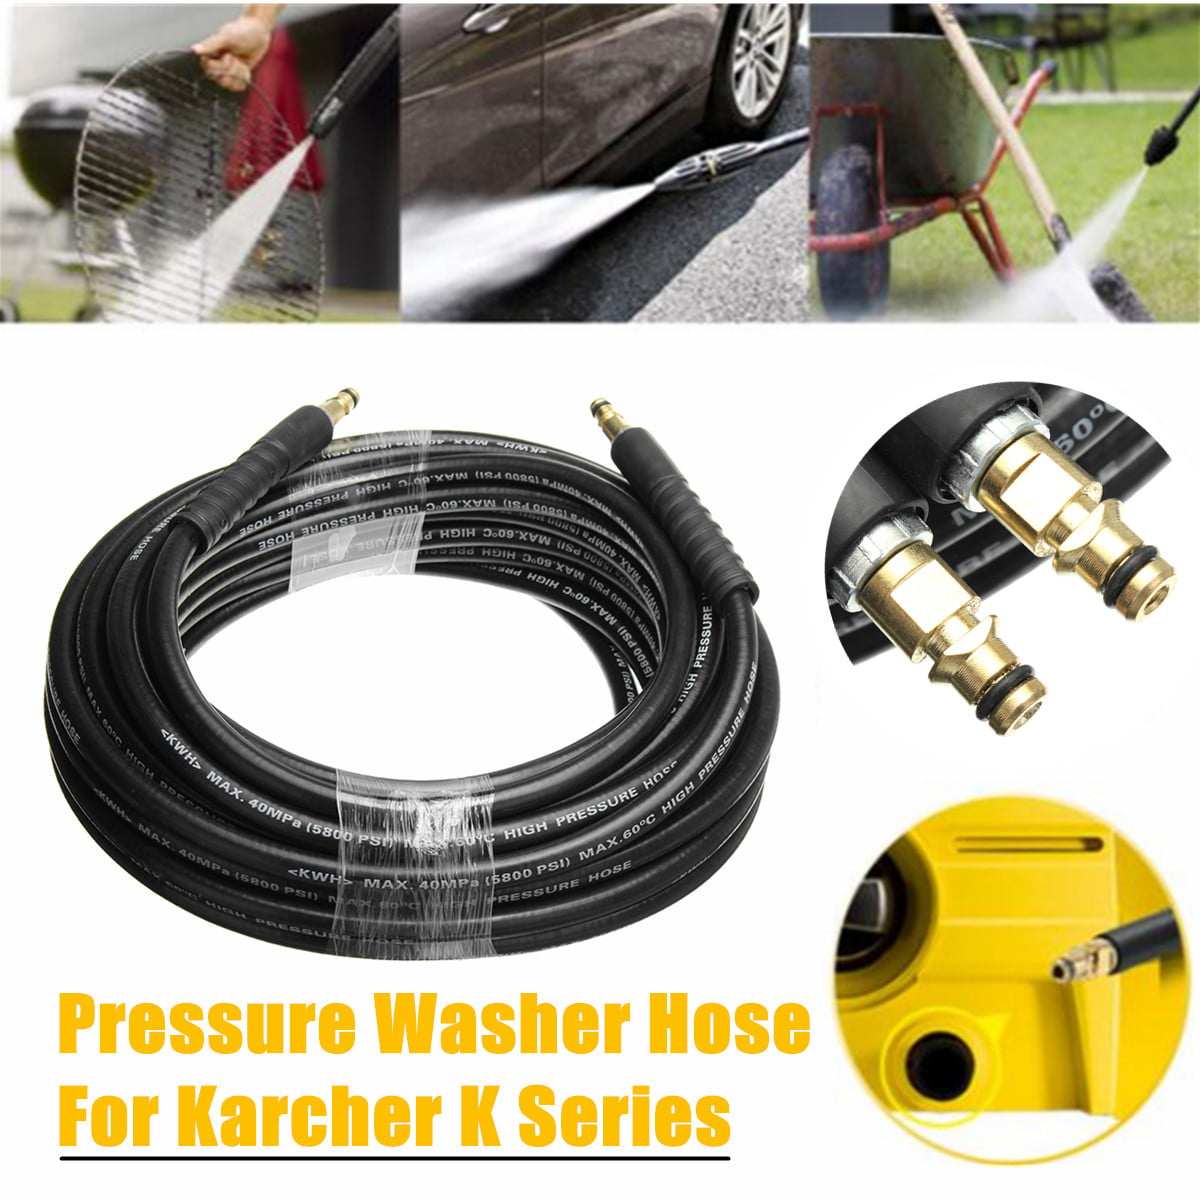 Hose Extension Connector for Karcher High Pressure Water Cleaning Hose 